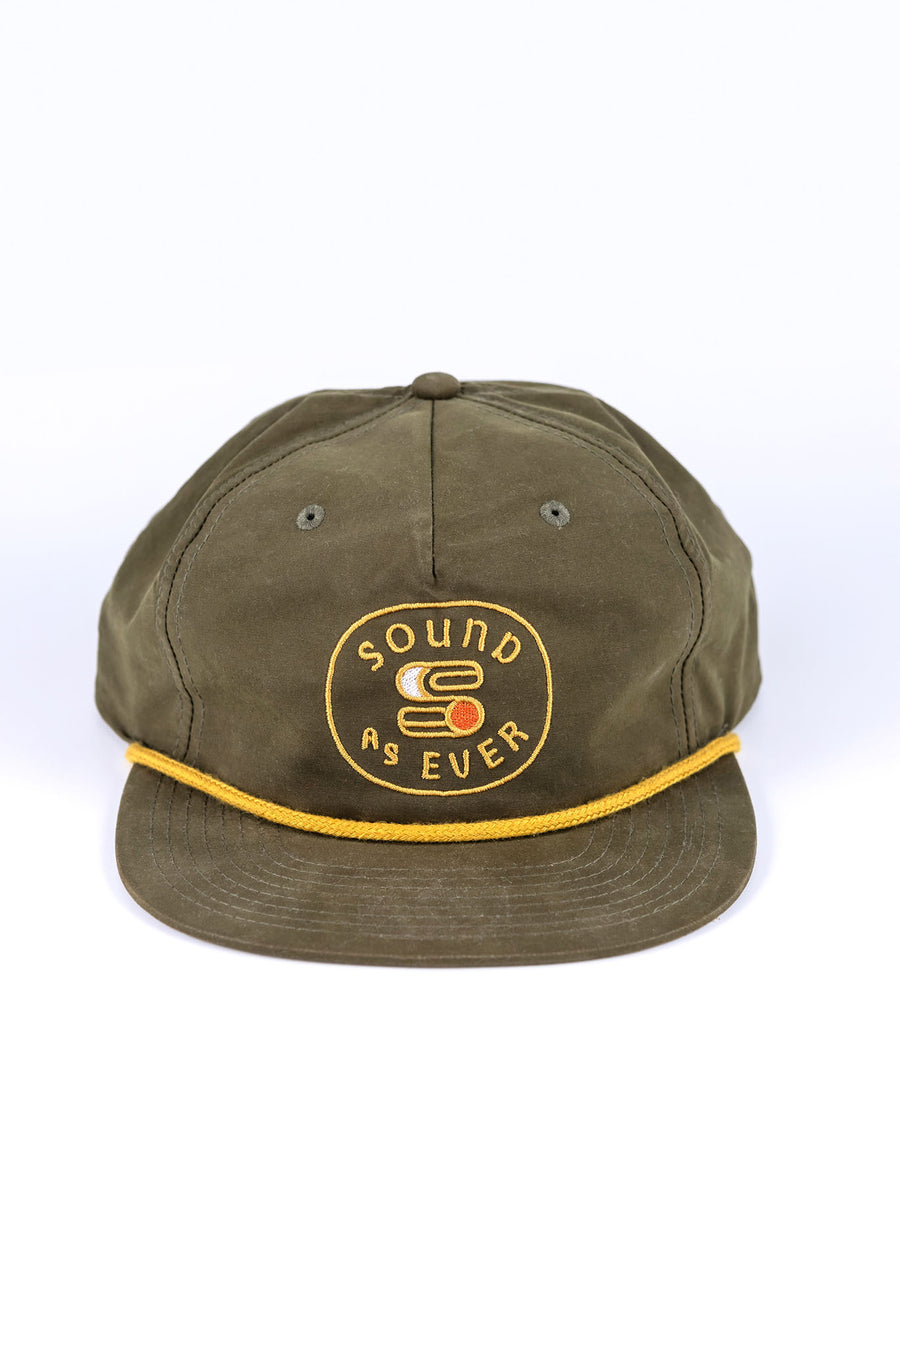 Olive green colored Sound As Ever snapback cap featuring yellow embroidered logo